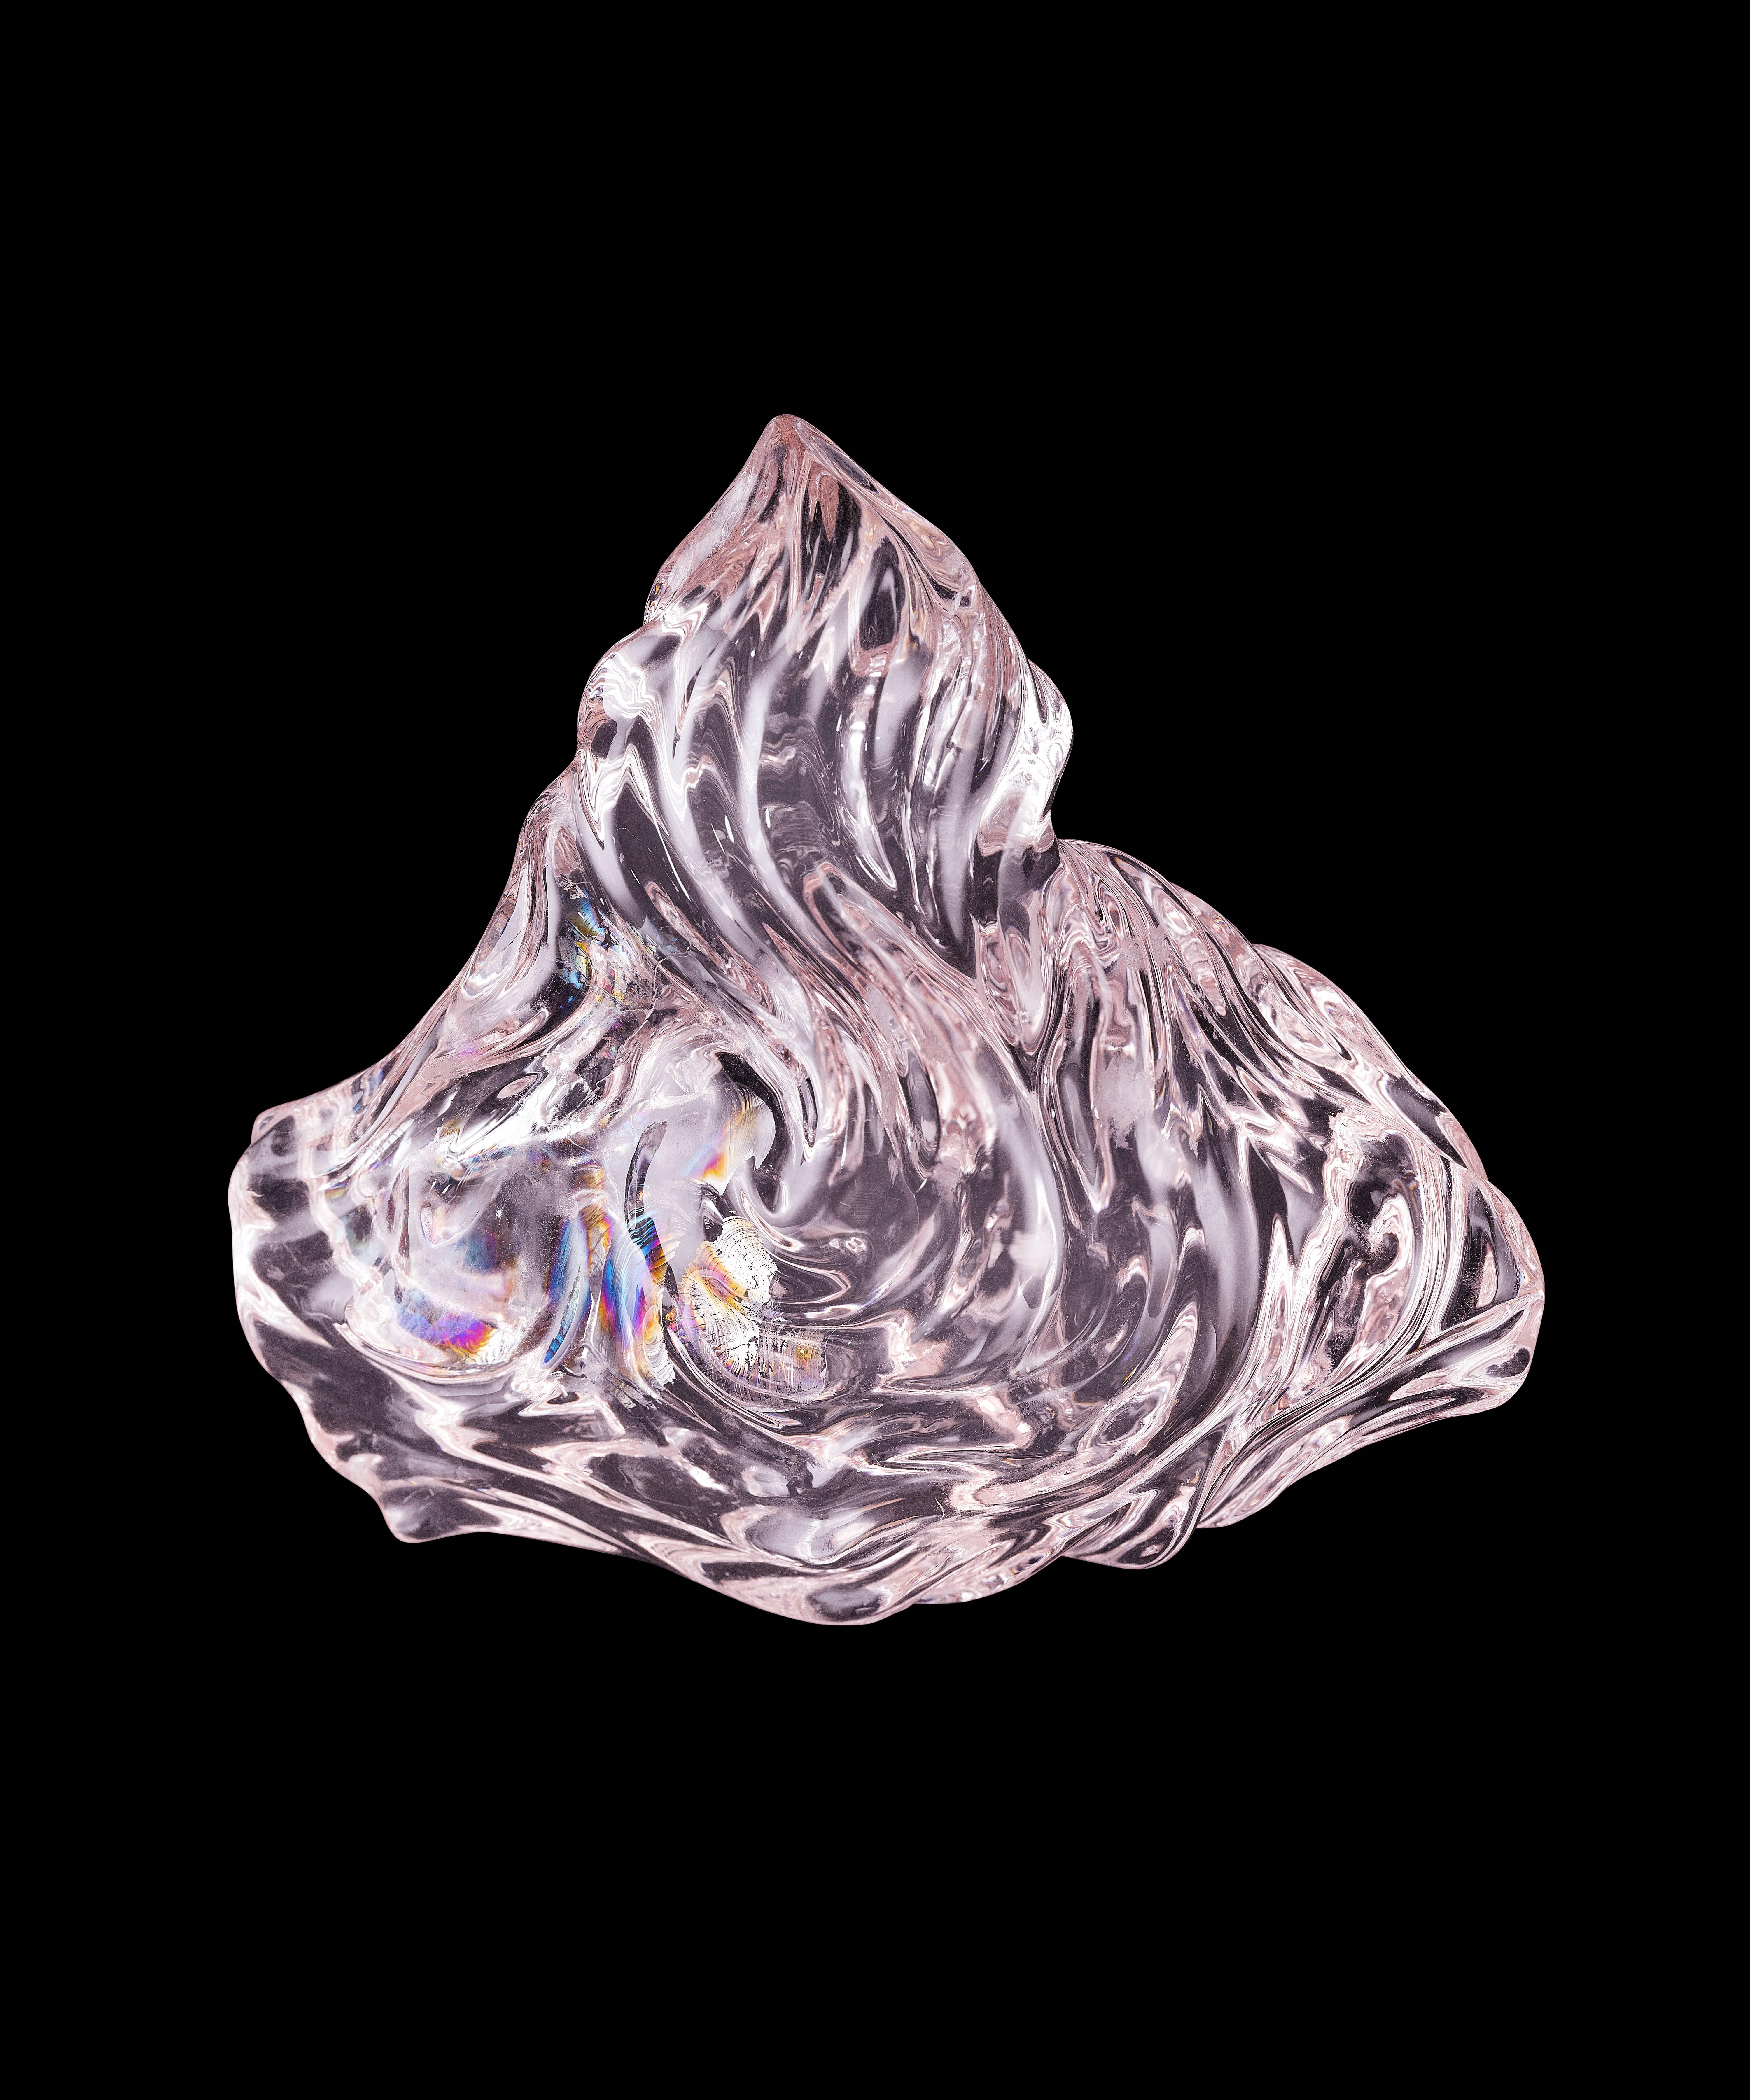 This sensuous carving enhances internal rainbow fractures which are self-healed and snowflake shaped inclusions. It's like holding a rainbow in your hand. It is 942 ct (197 g) and stands on a sterling silver base. Like all of Naomi's carvings, this